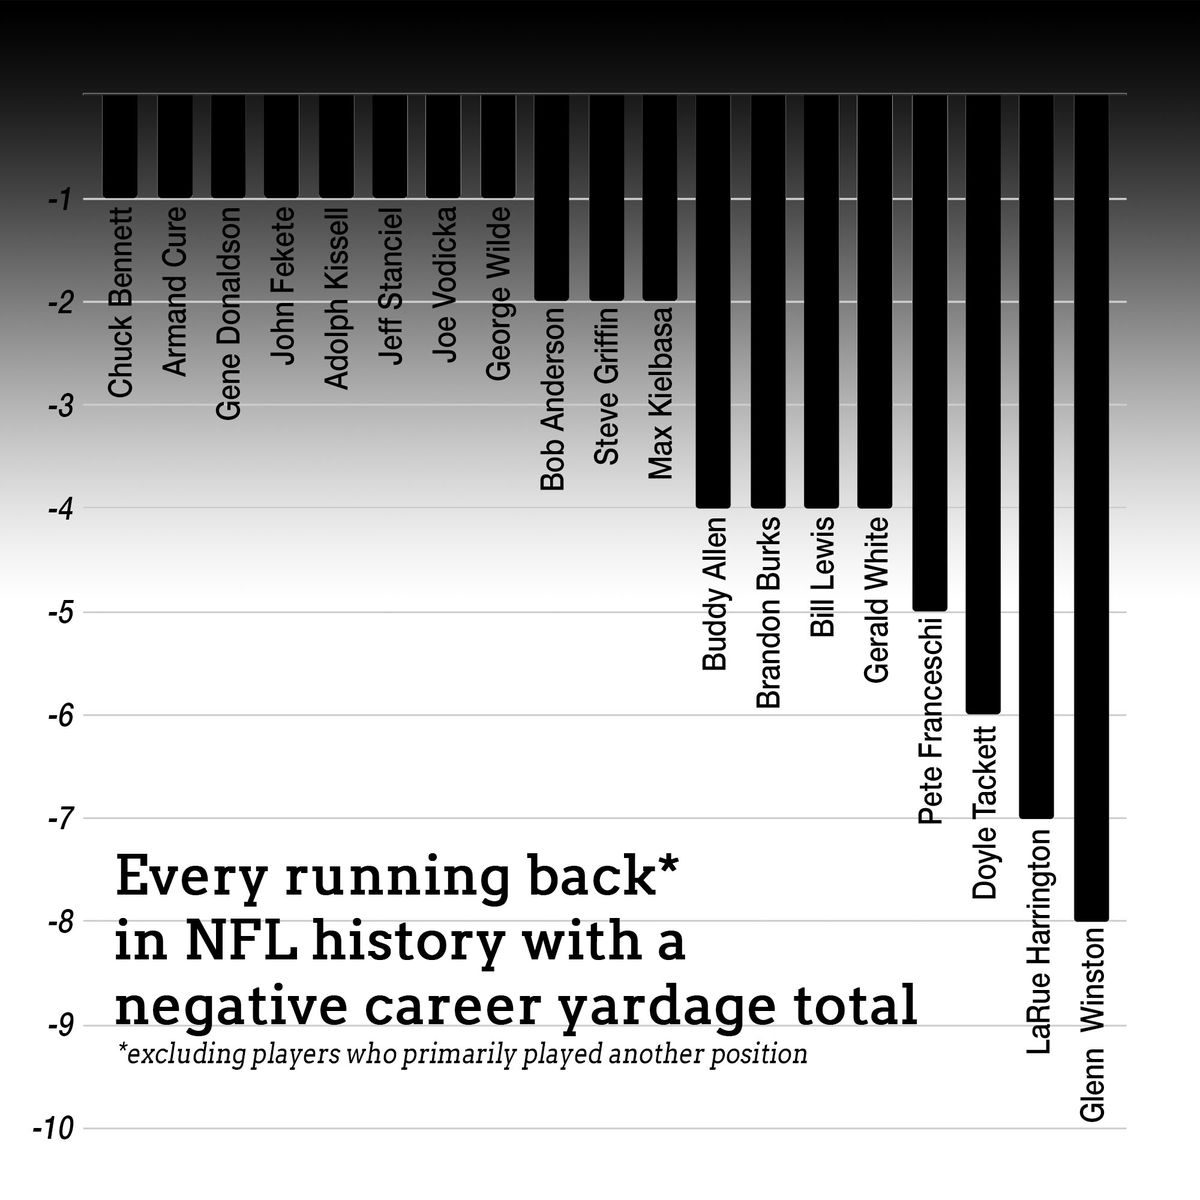 Every “pure” running back in NFL history with a negative career yardage total. At negative-8, Glenn Winston’s total is the lowest all-time.